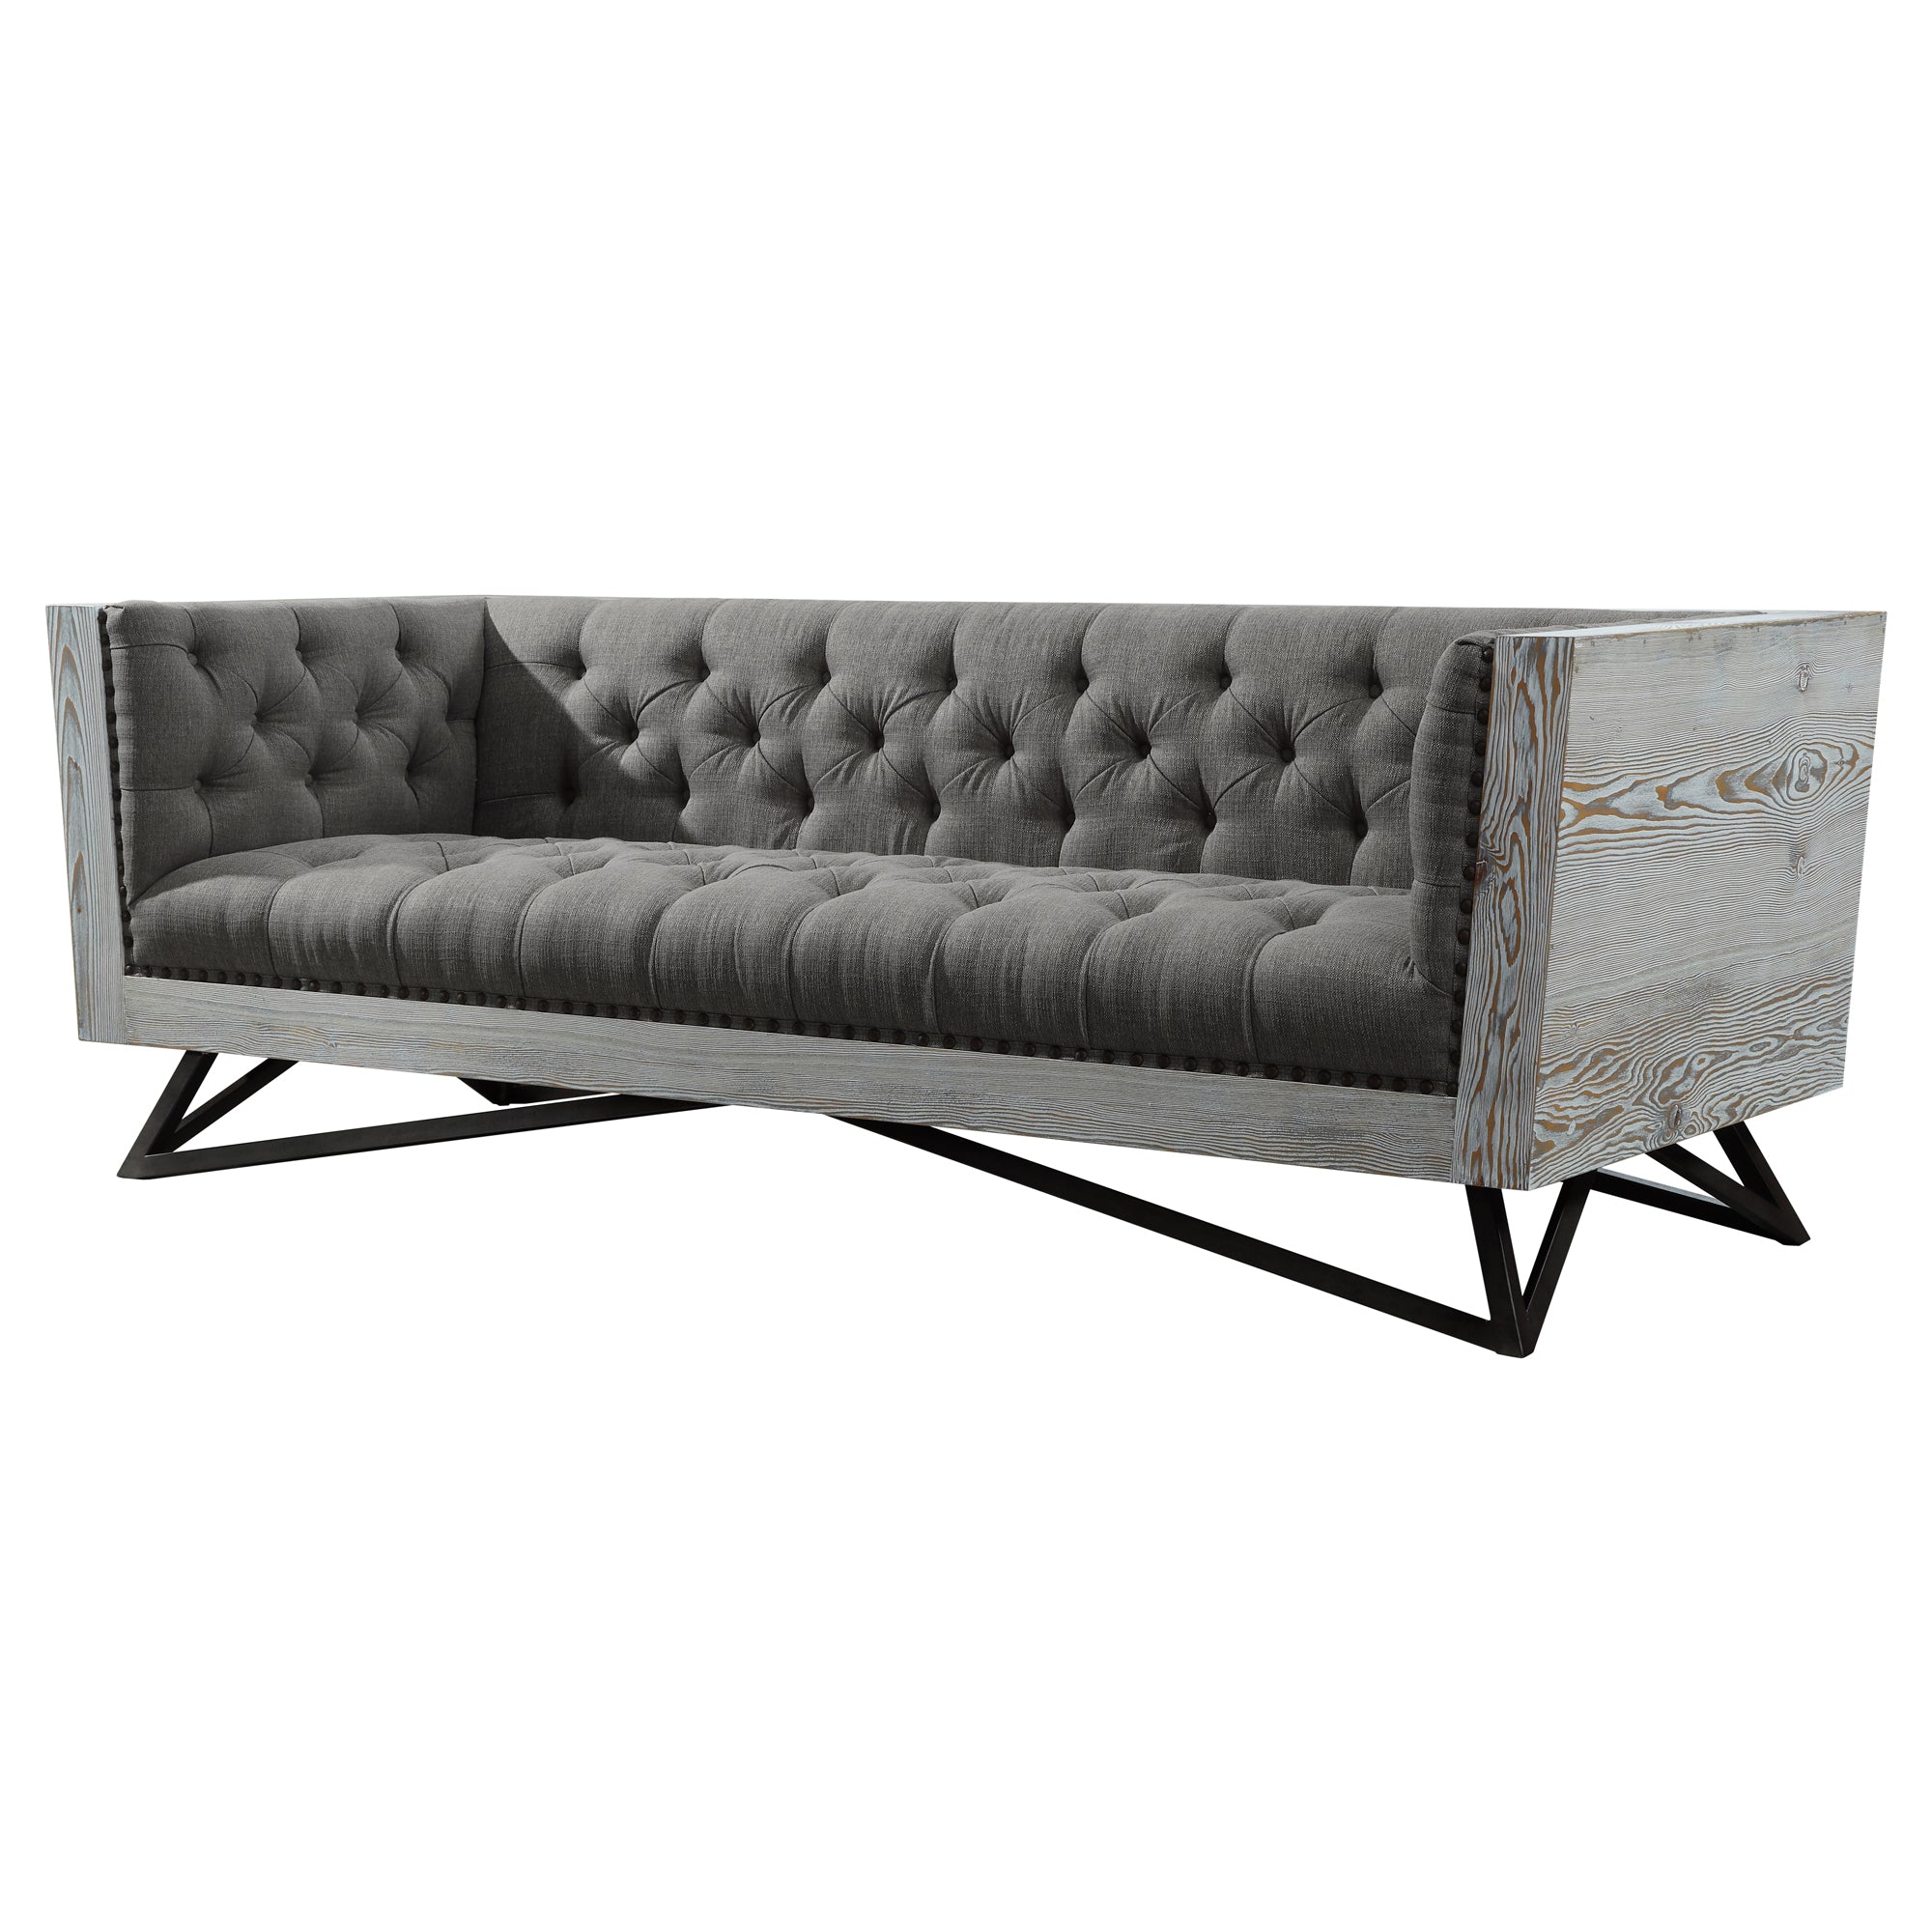 Armen Living Lcre3gr Regis Contemporary Sofa In Grey Fabric With Black Metal Finish Legs And Antique Brown Nailhead Accents